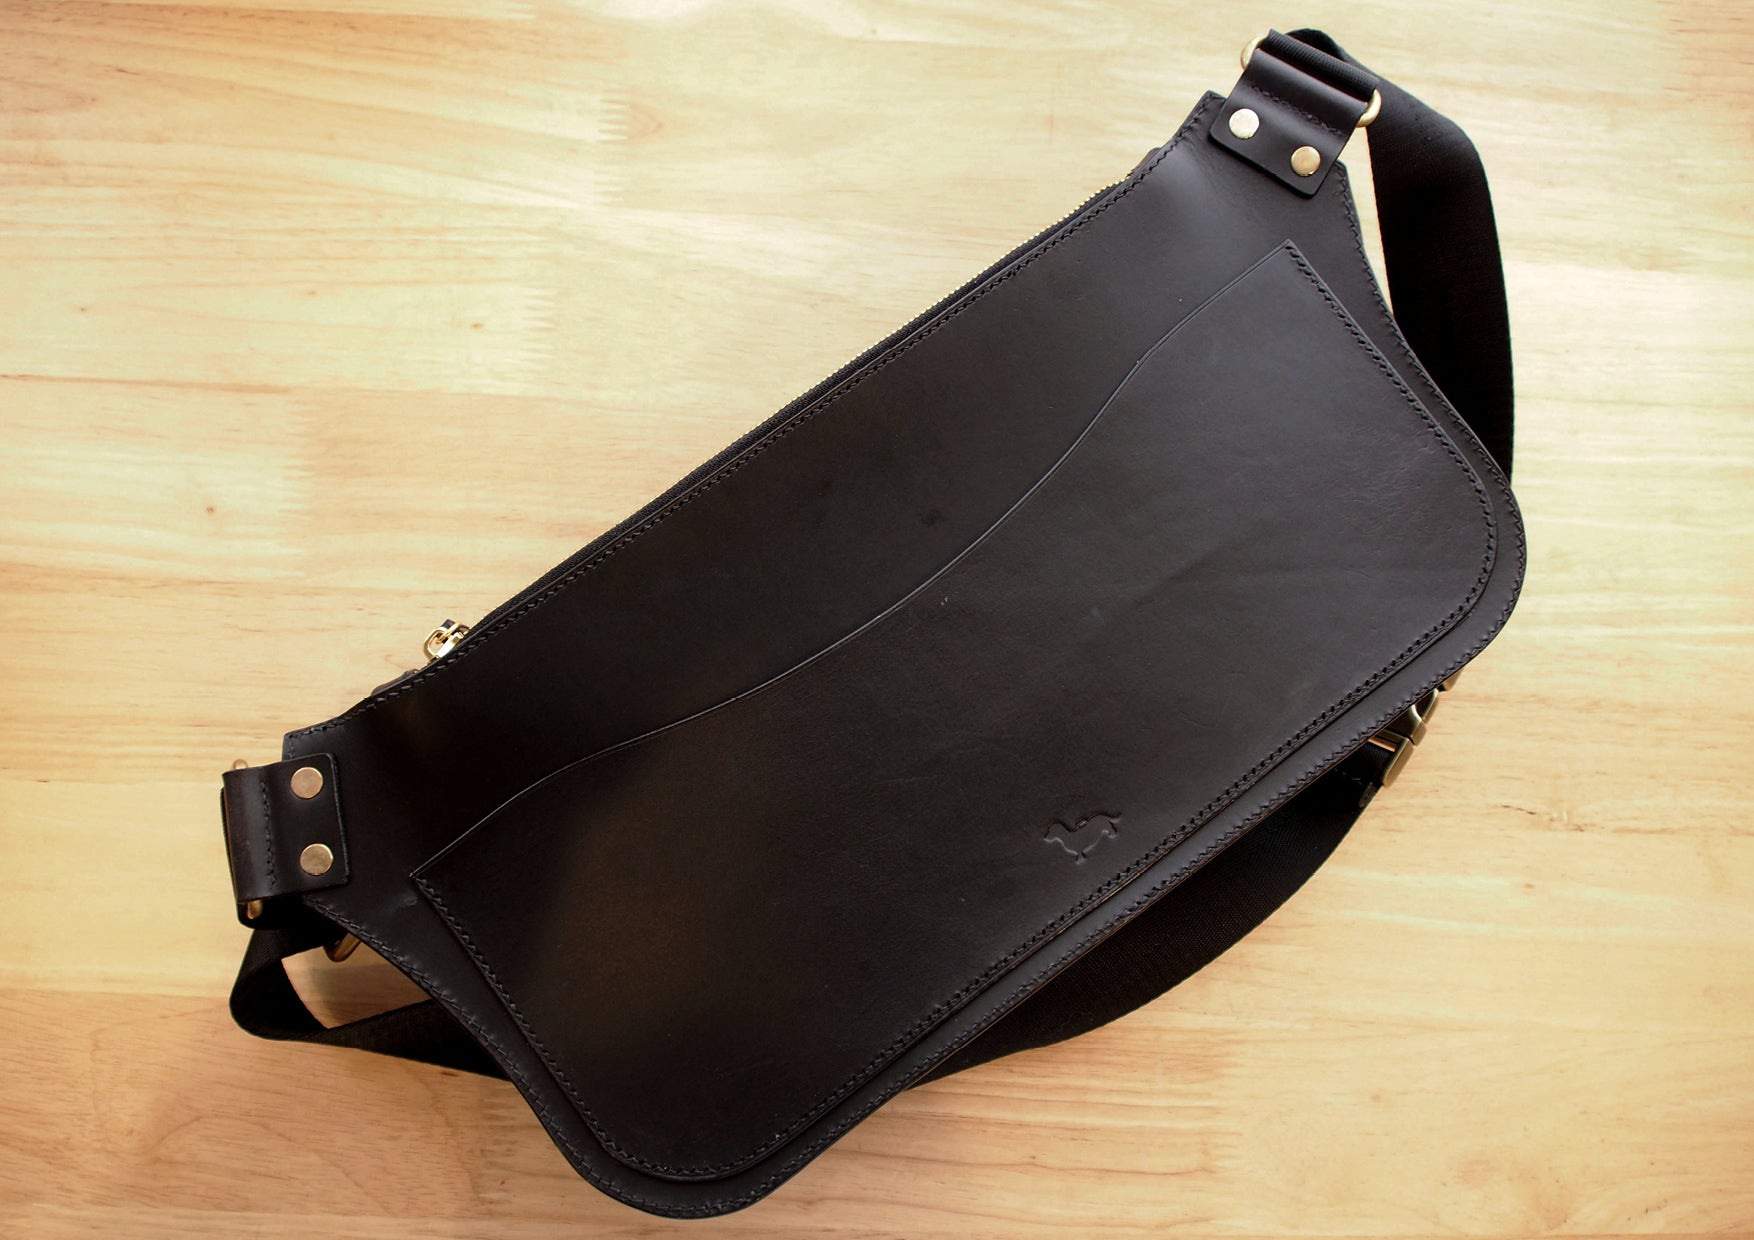 Leather Bum Bag/ Fanny Pack Pattern – Leather Bag Pattern